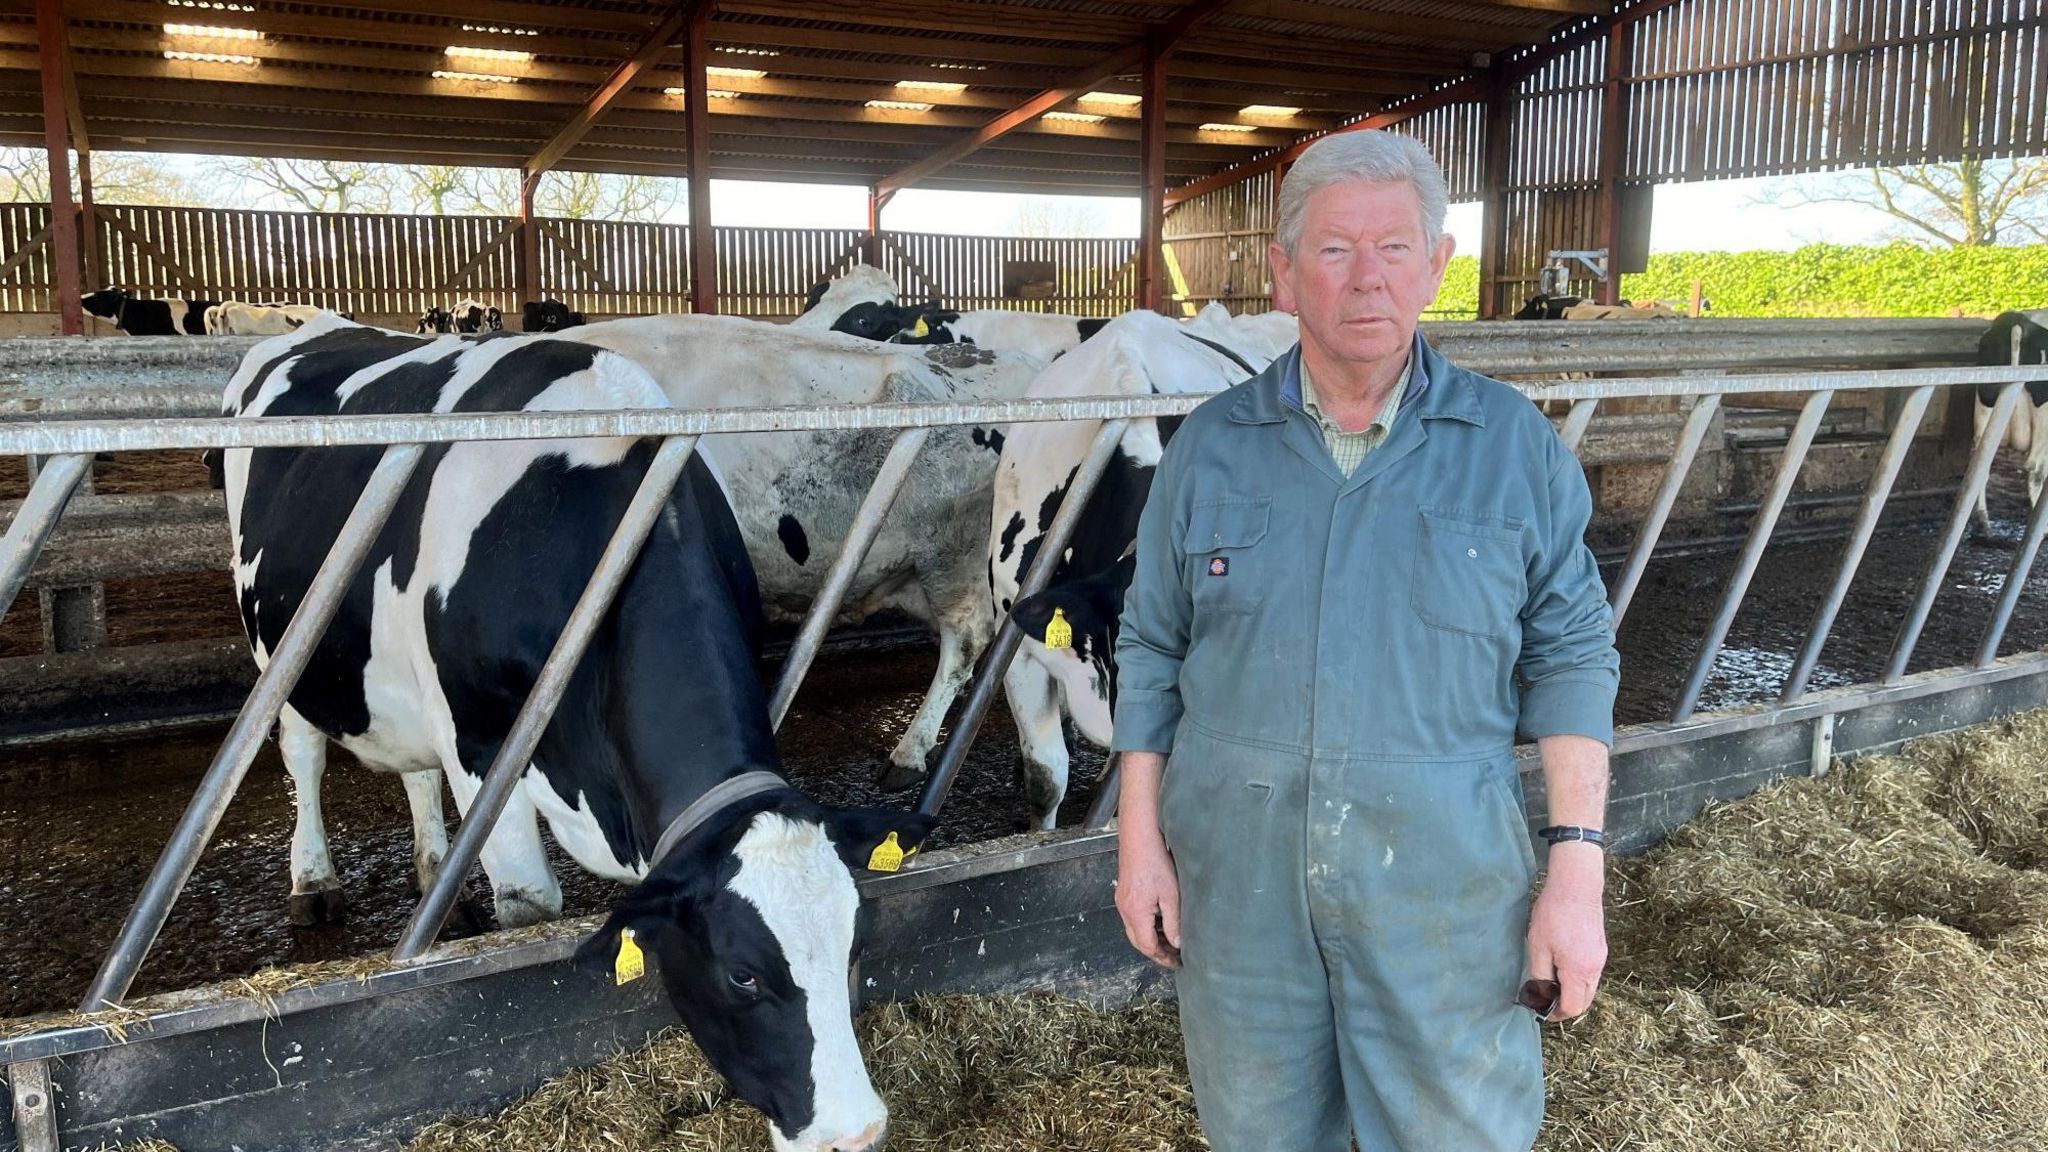 Alan Franks with his cows inside a barn